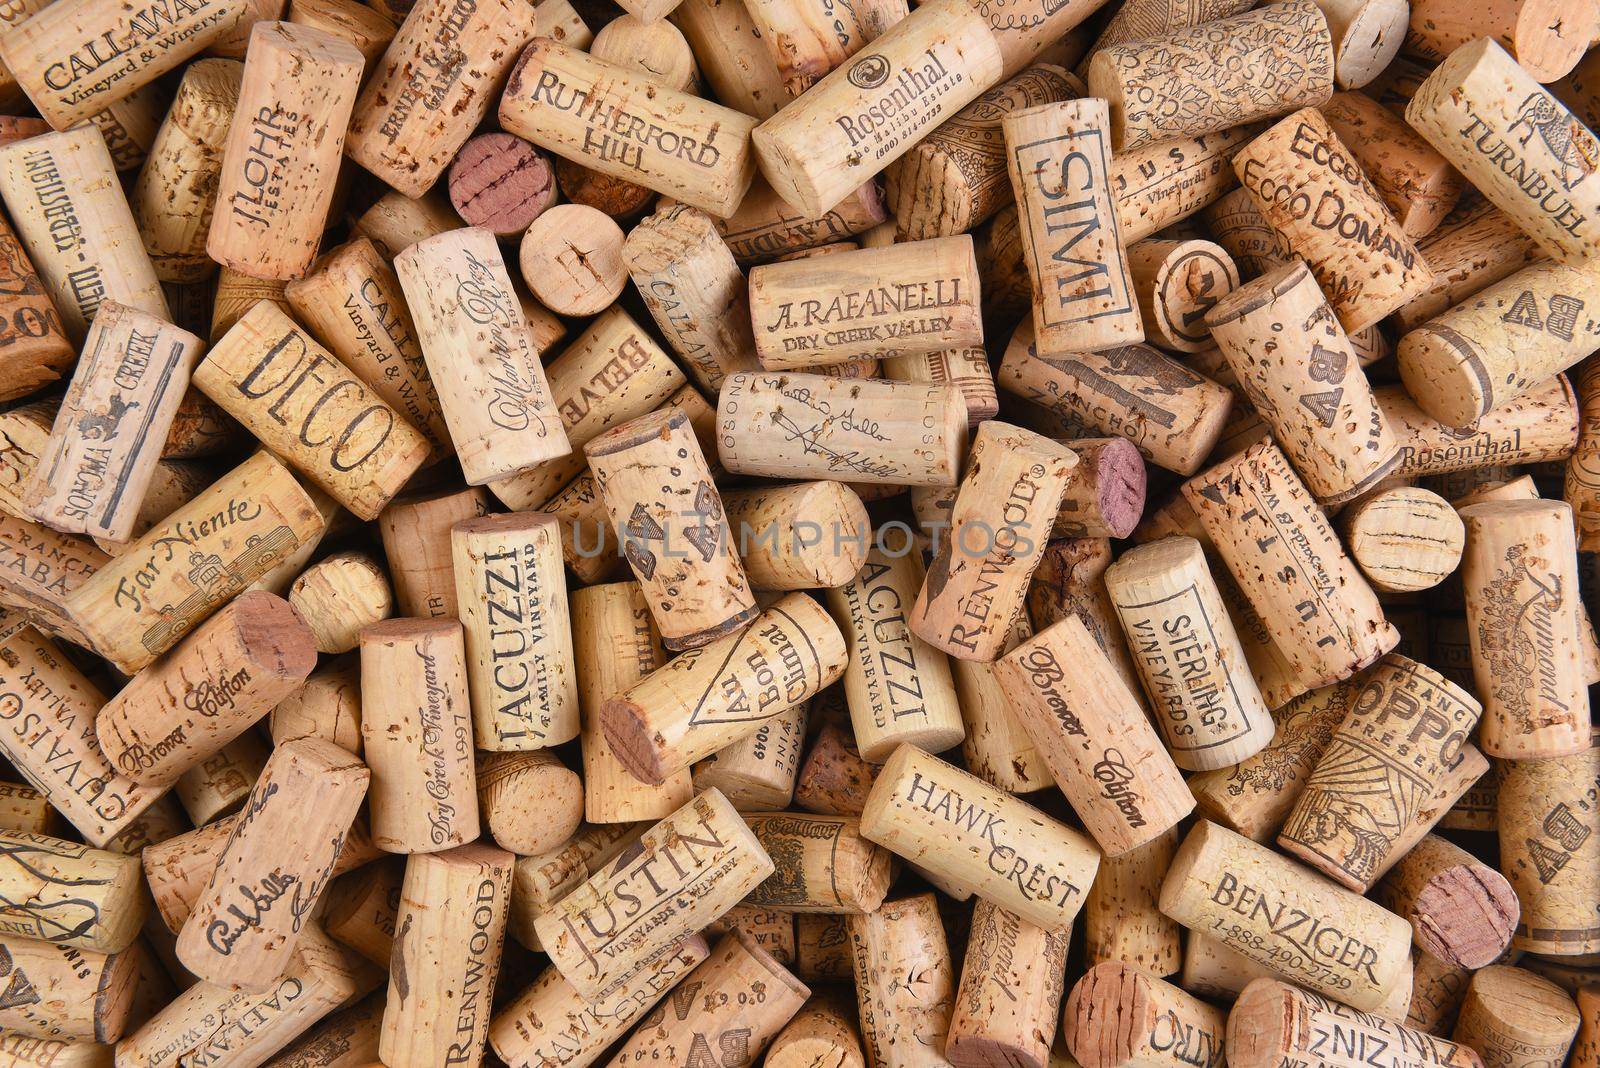 IRIVNE, CALIFORNIA - FEBRUARY 14, 2018: A pile of Predominently California wine corks with a variety of logos and names. 